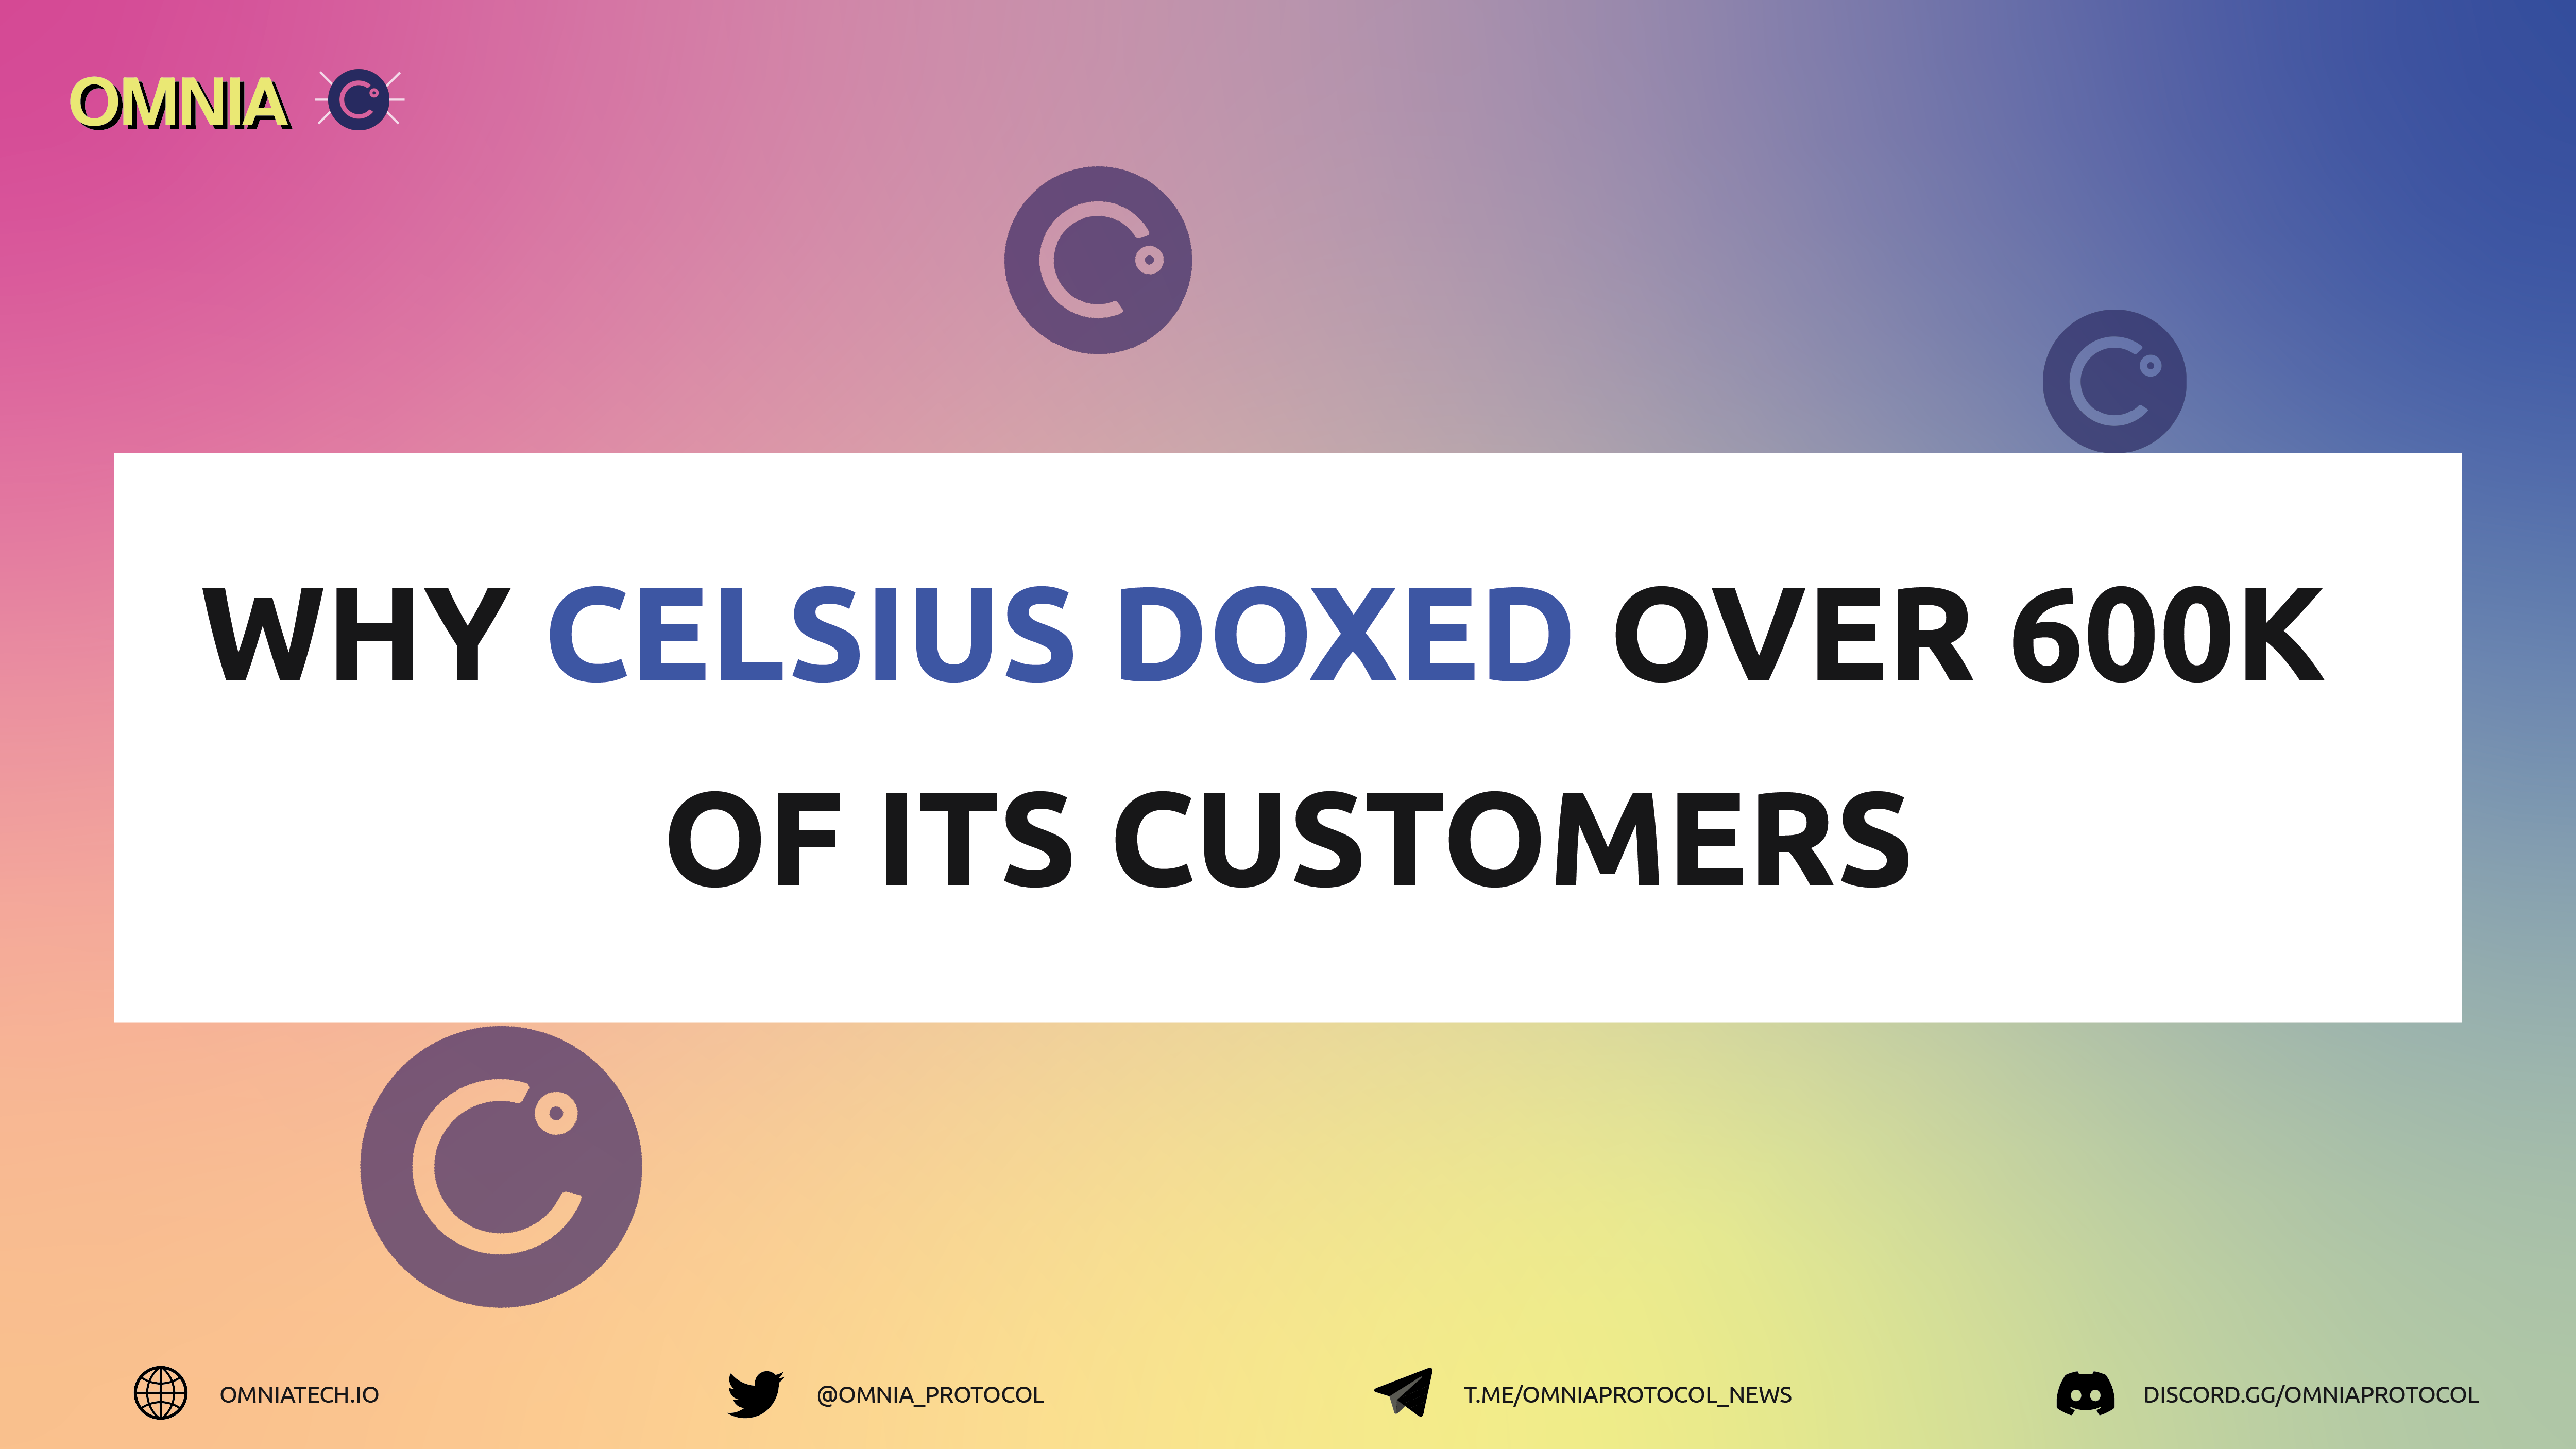 Why Celsius ‘Doxed’ Over 600k of its Customers